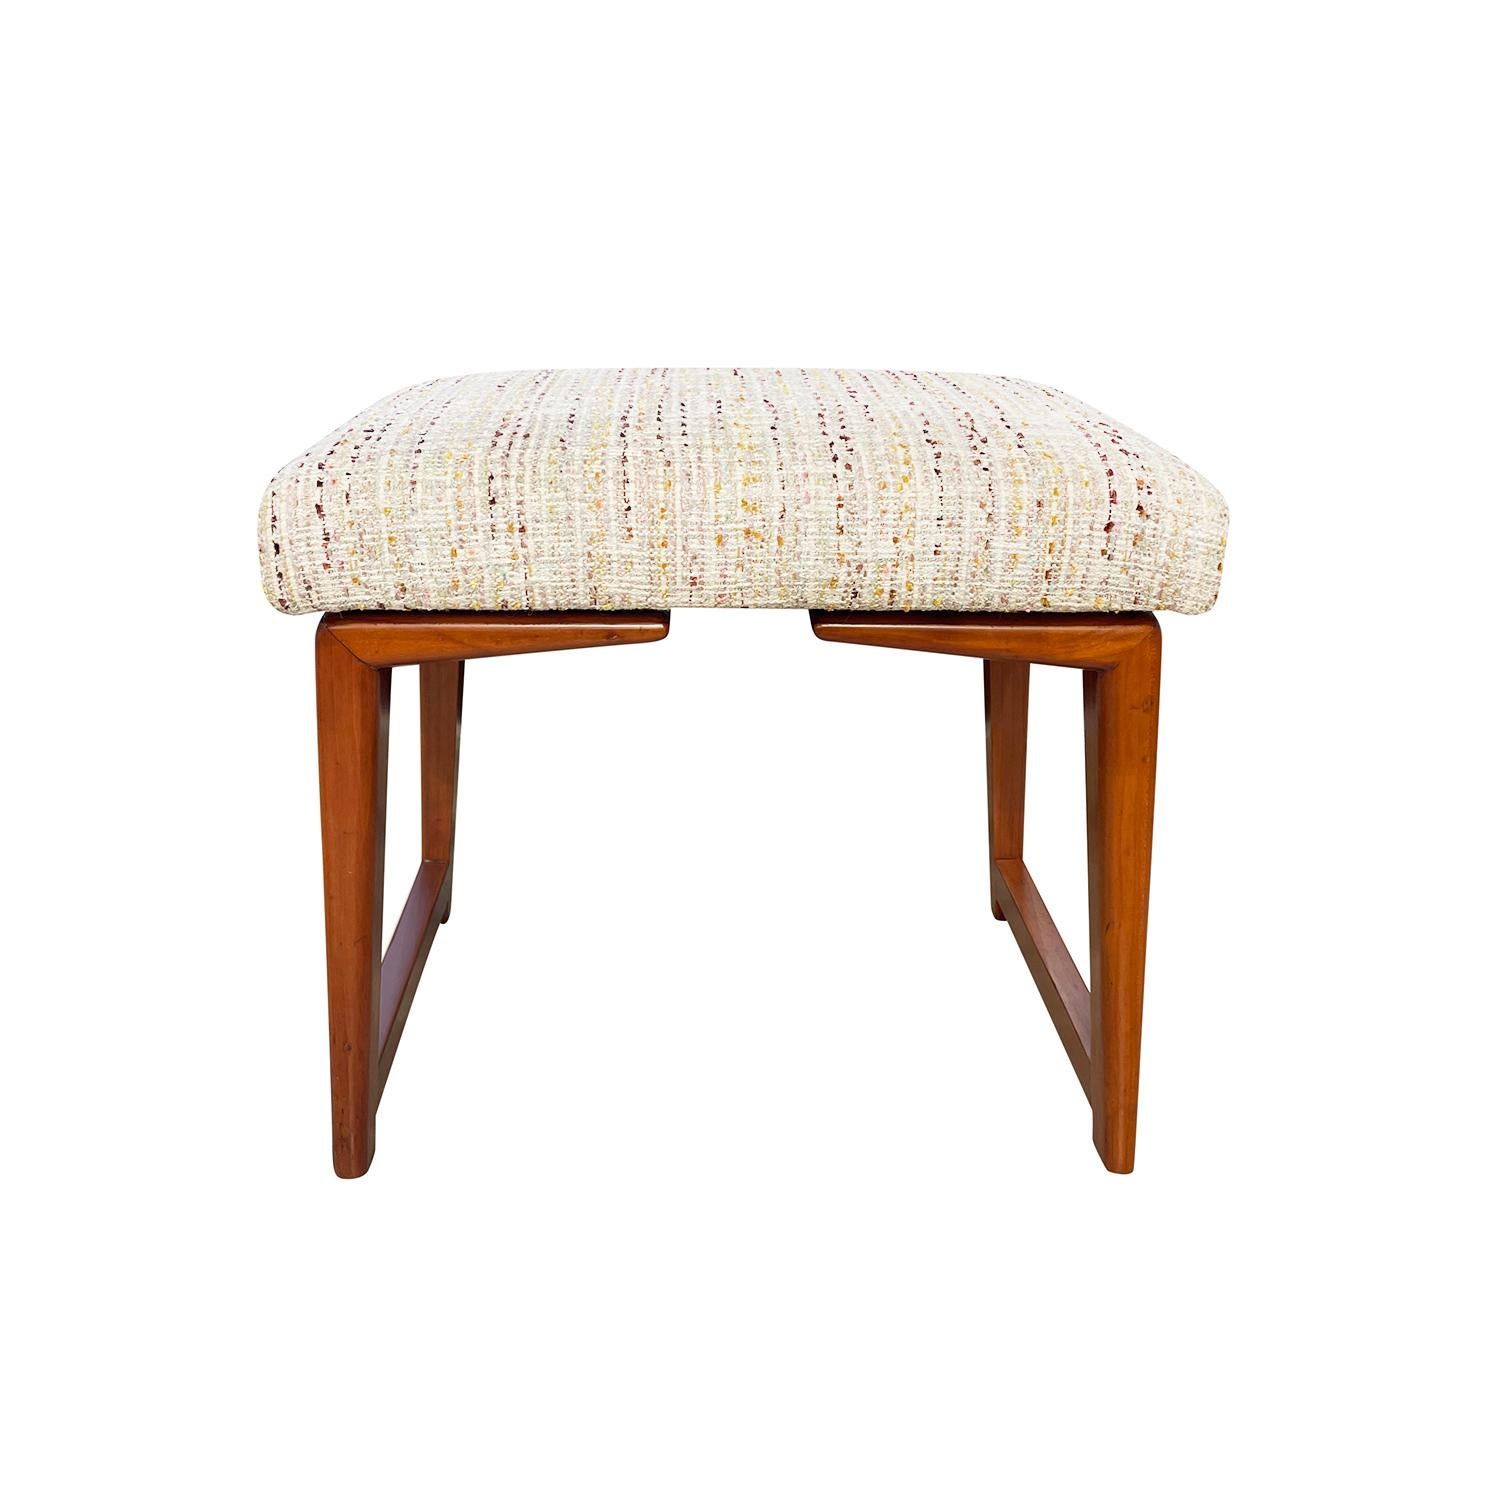 A rectangular, vintage Mid-Century modern Italian piano stool made of hand crafted polished Walnut, in good condition. The detailed ottoman is supported by four arched wooden legs. Newly upholstered in an an oat milk cotton fabric, detailed with